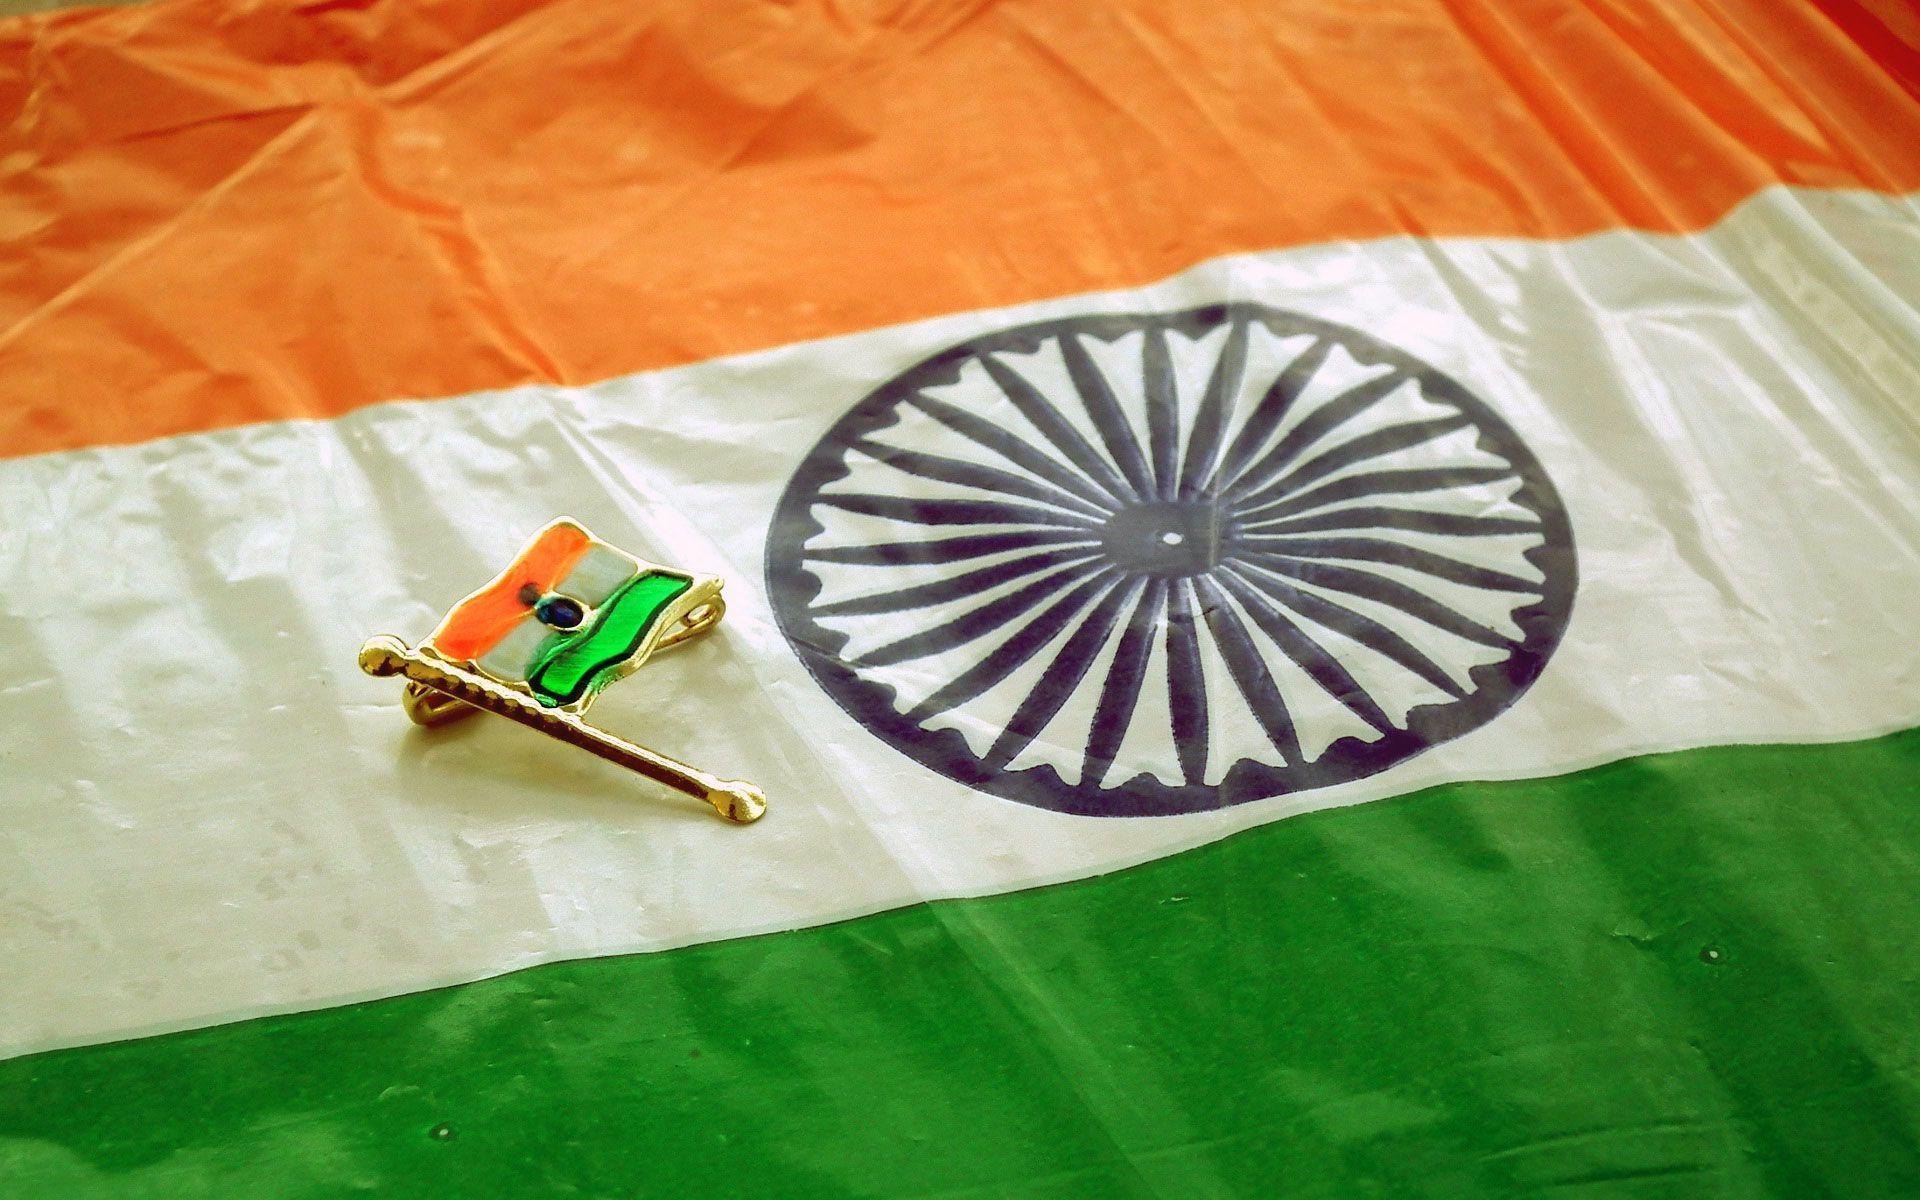 Indian Flag HD Image and Wallpaper Free Download